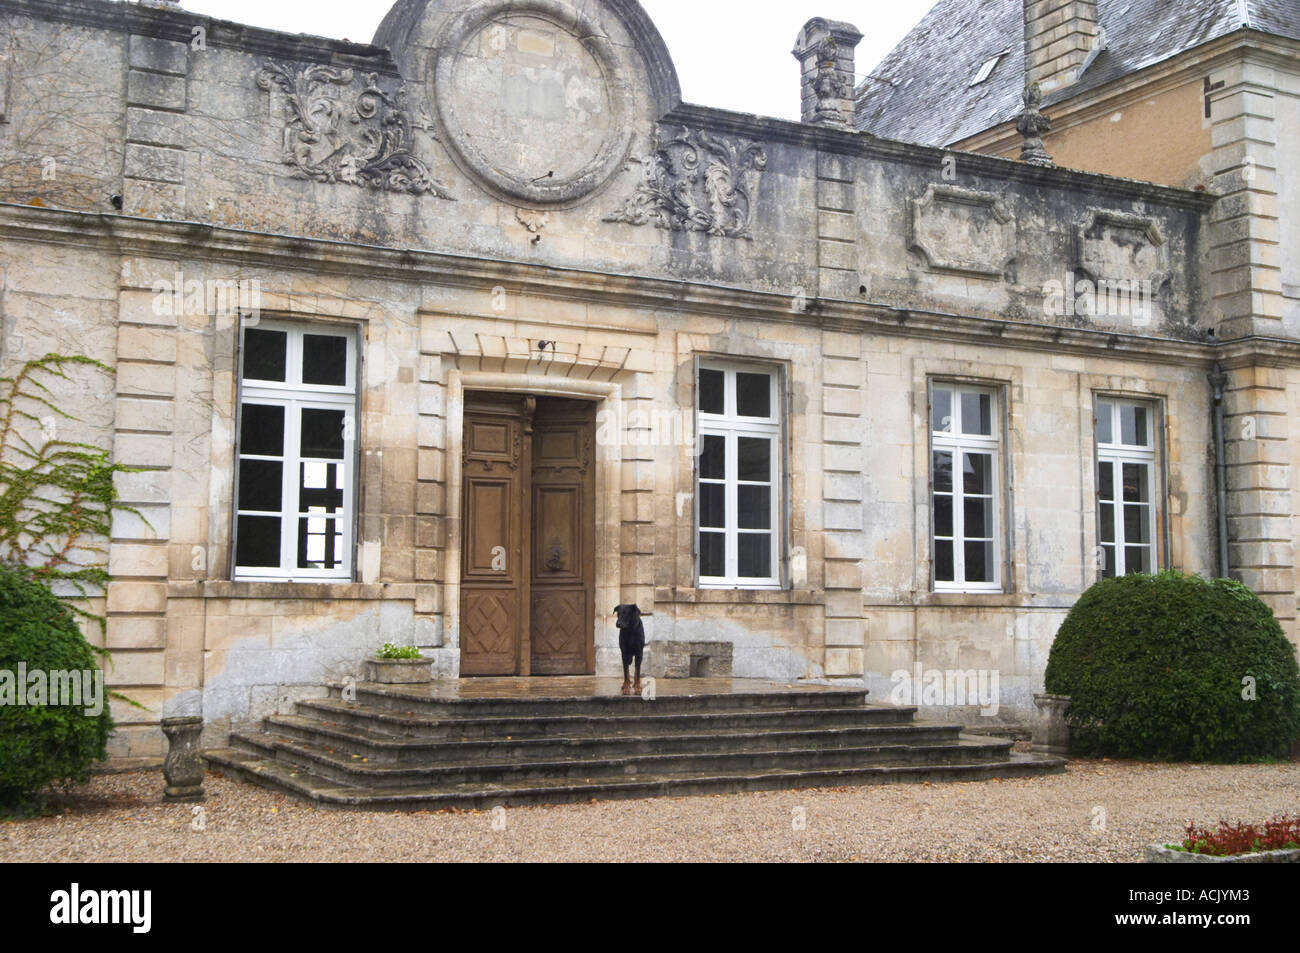 The front towards the gate and court yard of the chateau building with classic facade and stately steps leading up to the door. Stock Photo